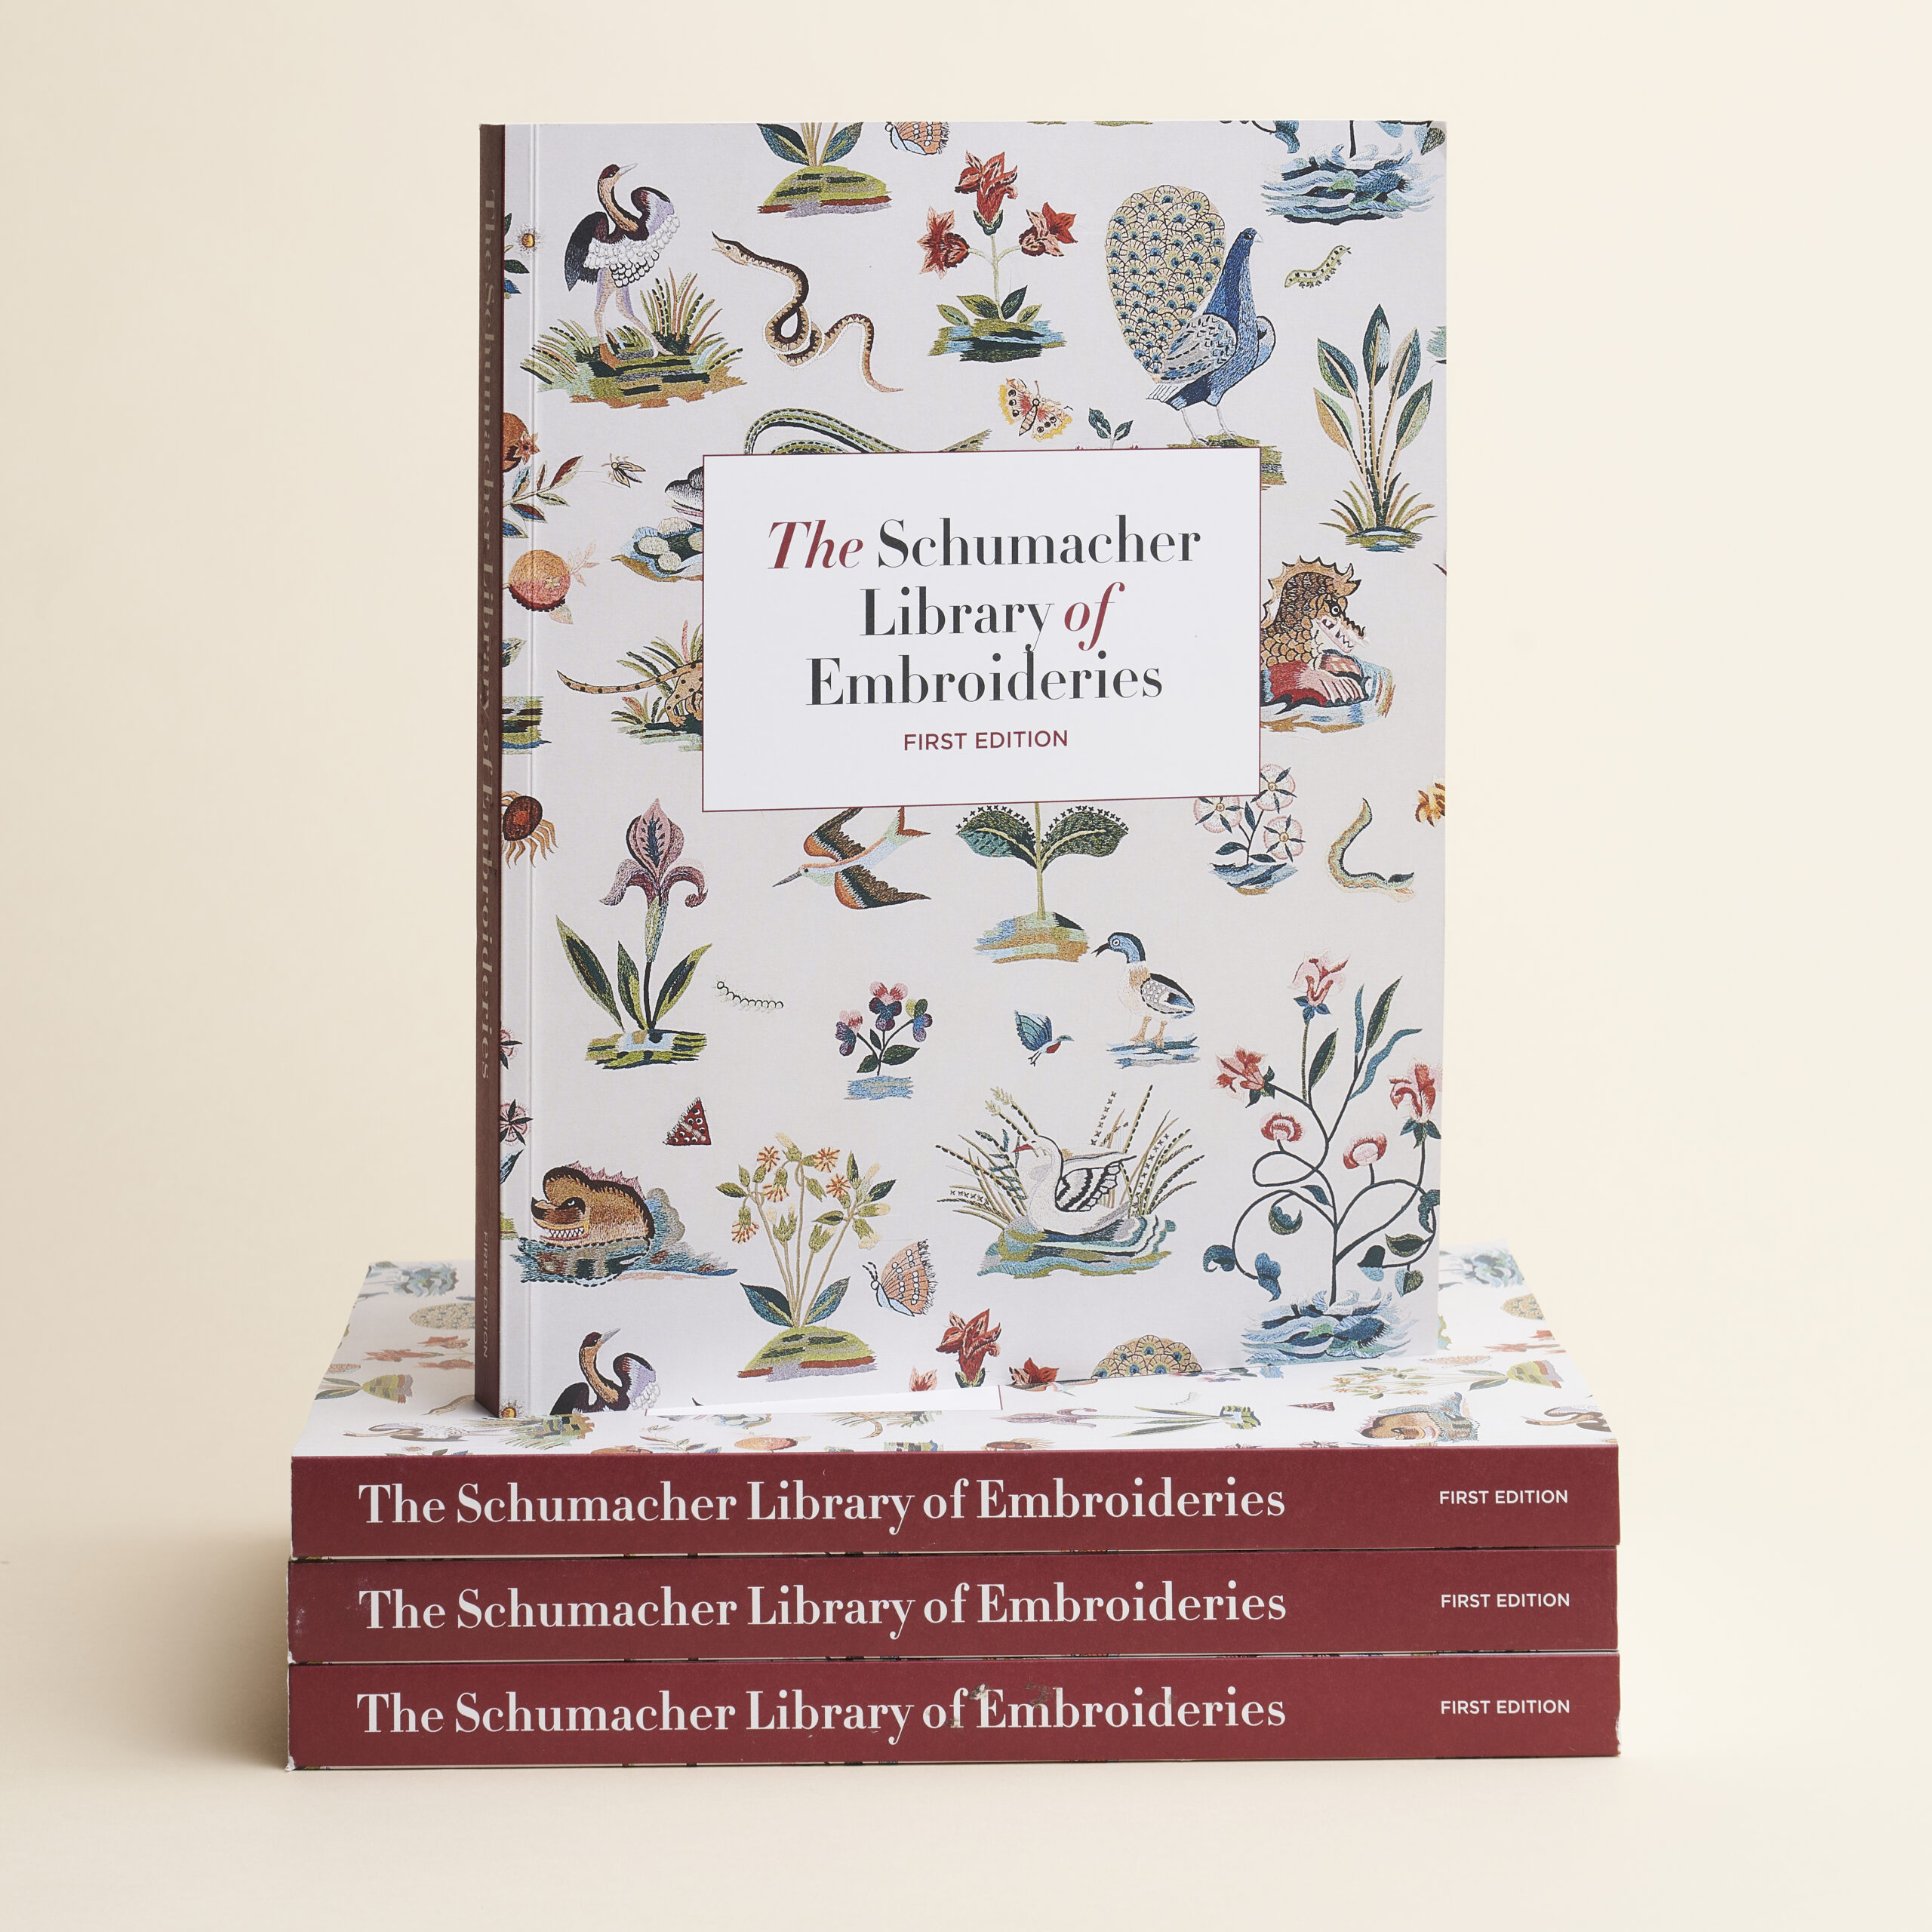 The Schumacher Library of Embroideries, First Edition